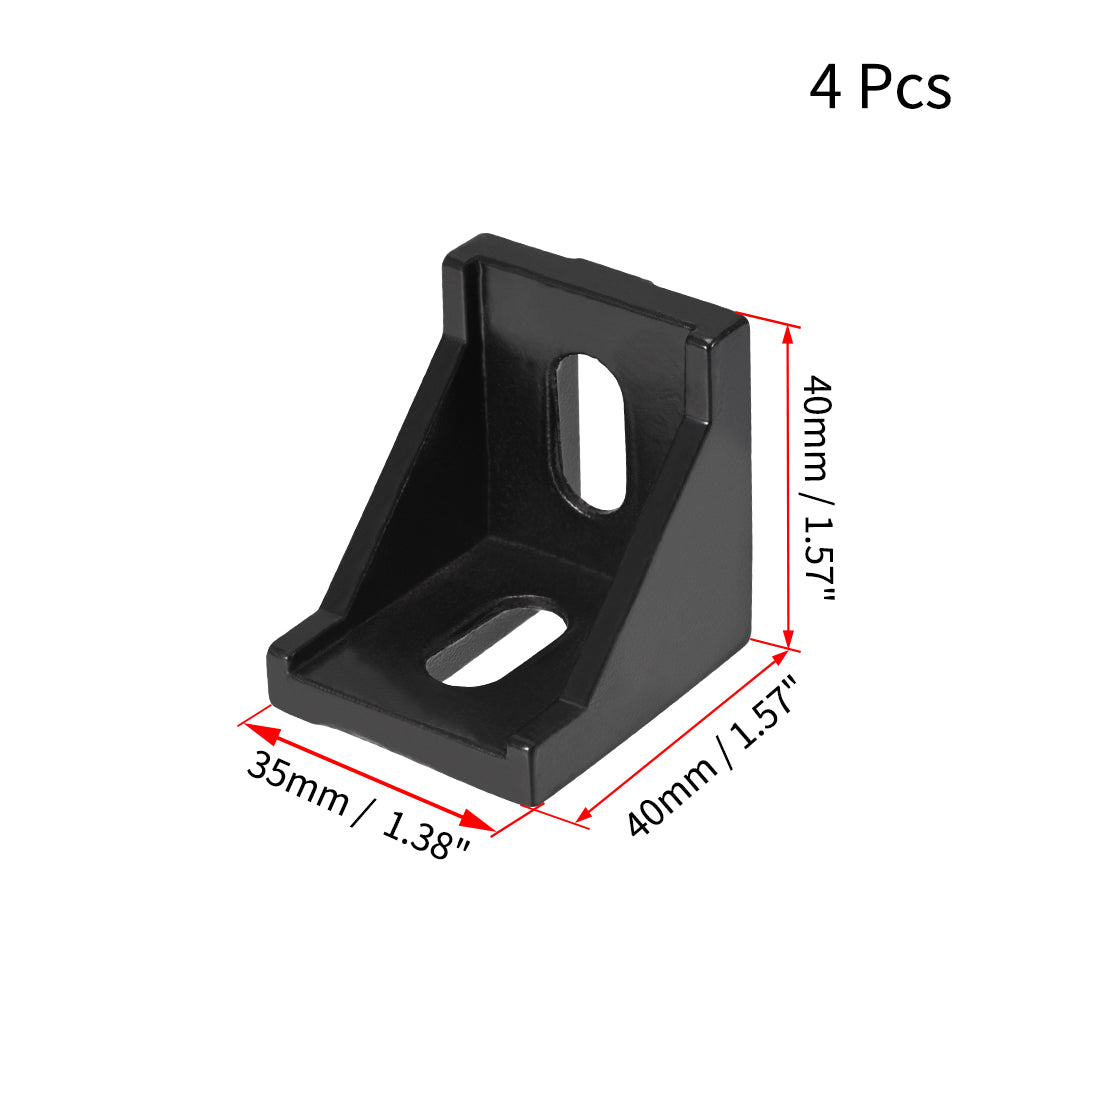 uxcell Uxcell Inside Corner Bracket Gusset, 40mm x 40mm for 4040 Series Aluminum Extrusion Profile with Slot 8mm, 4 Pcs (Black)